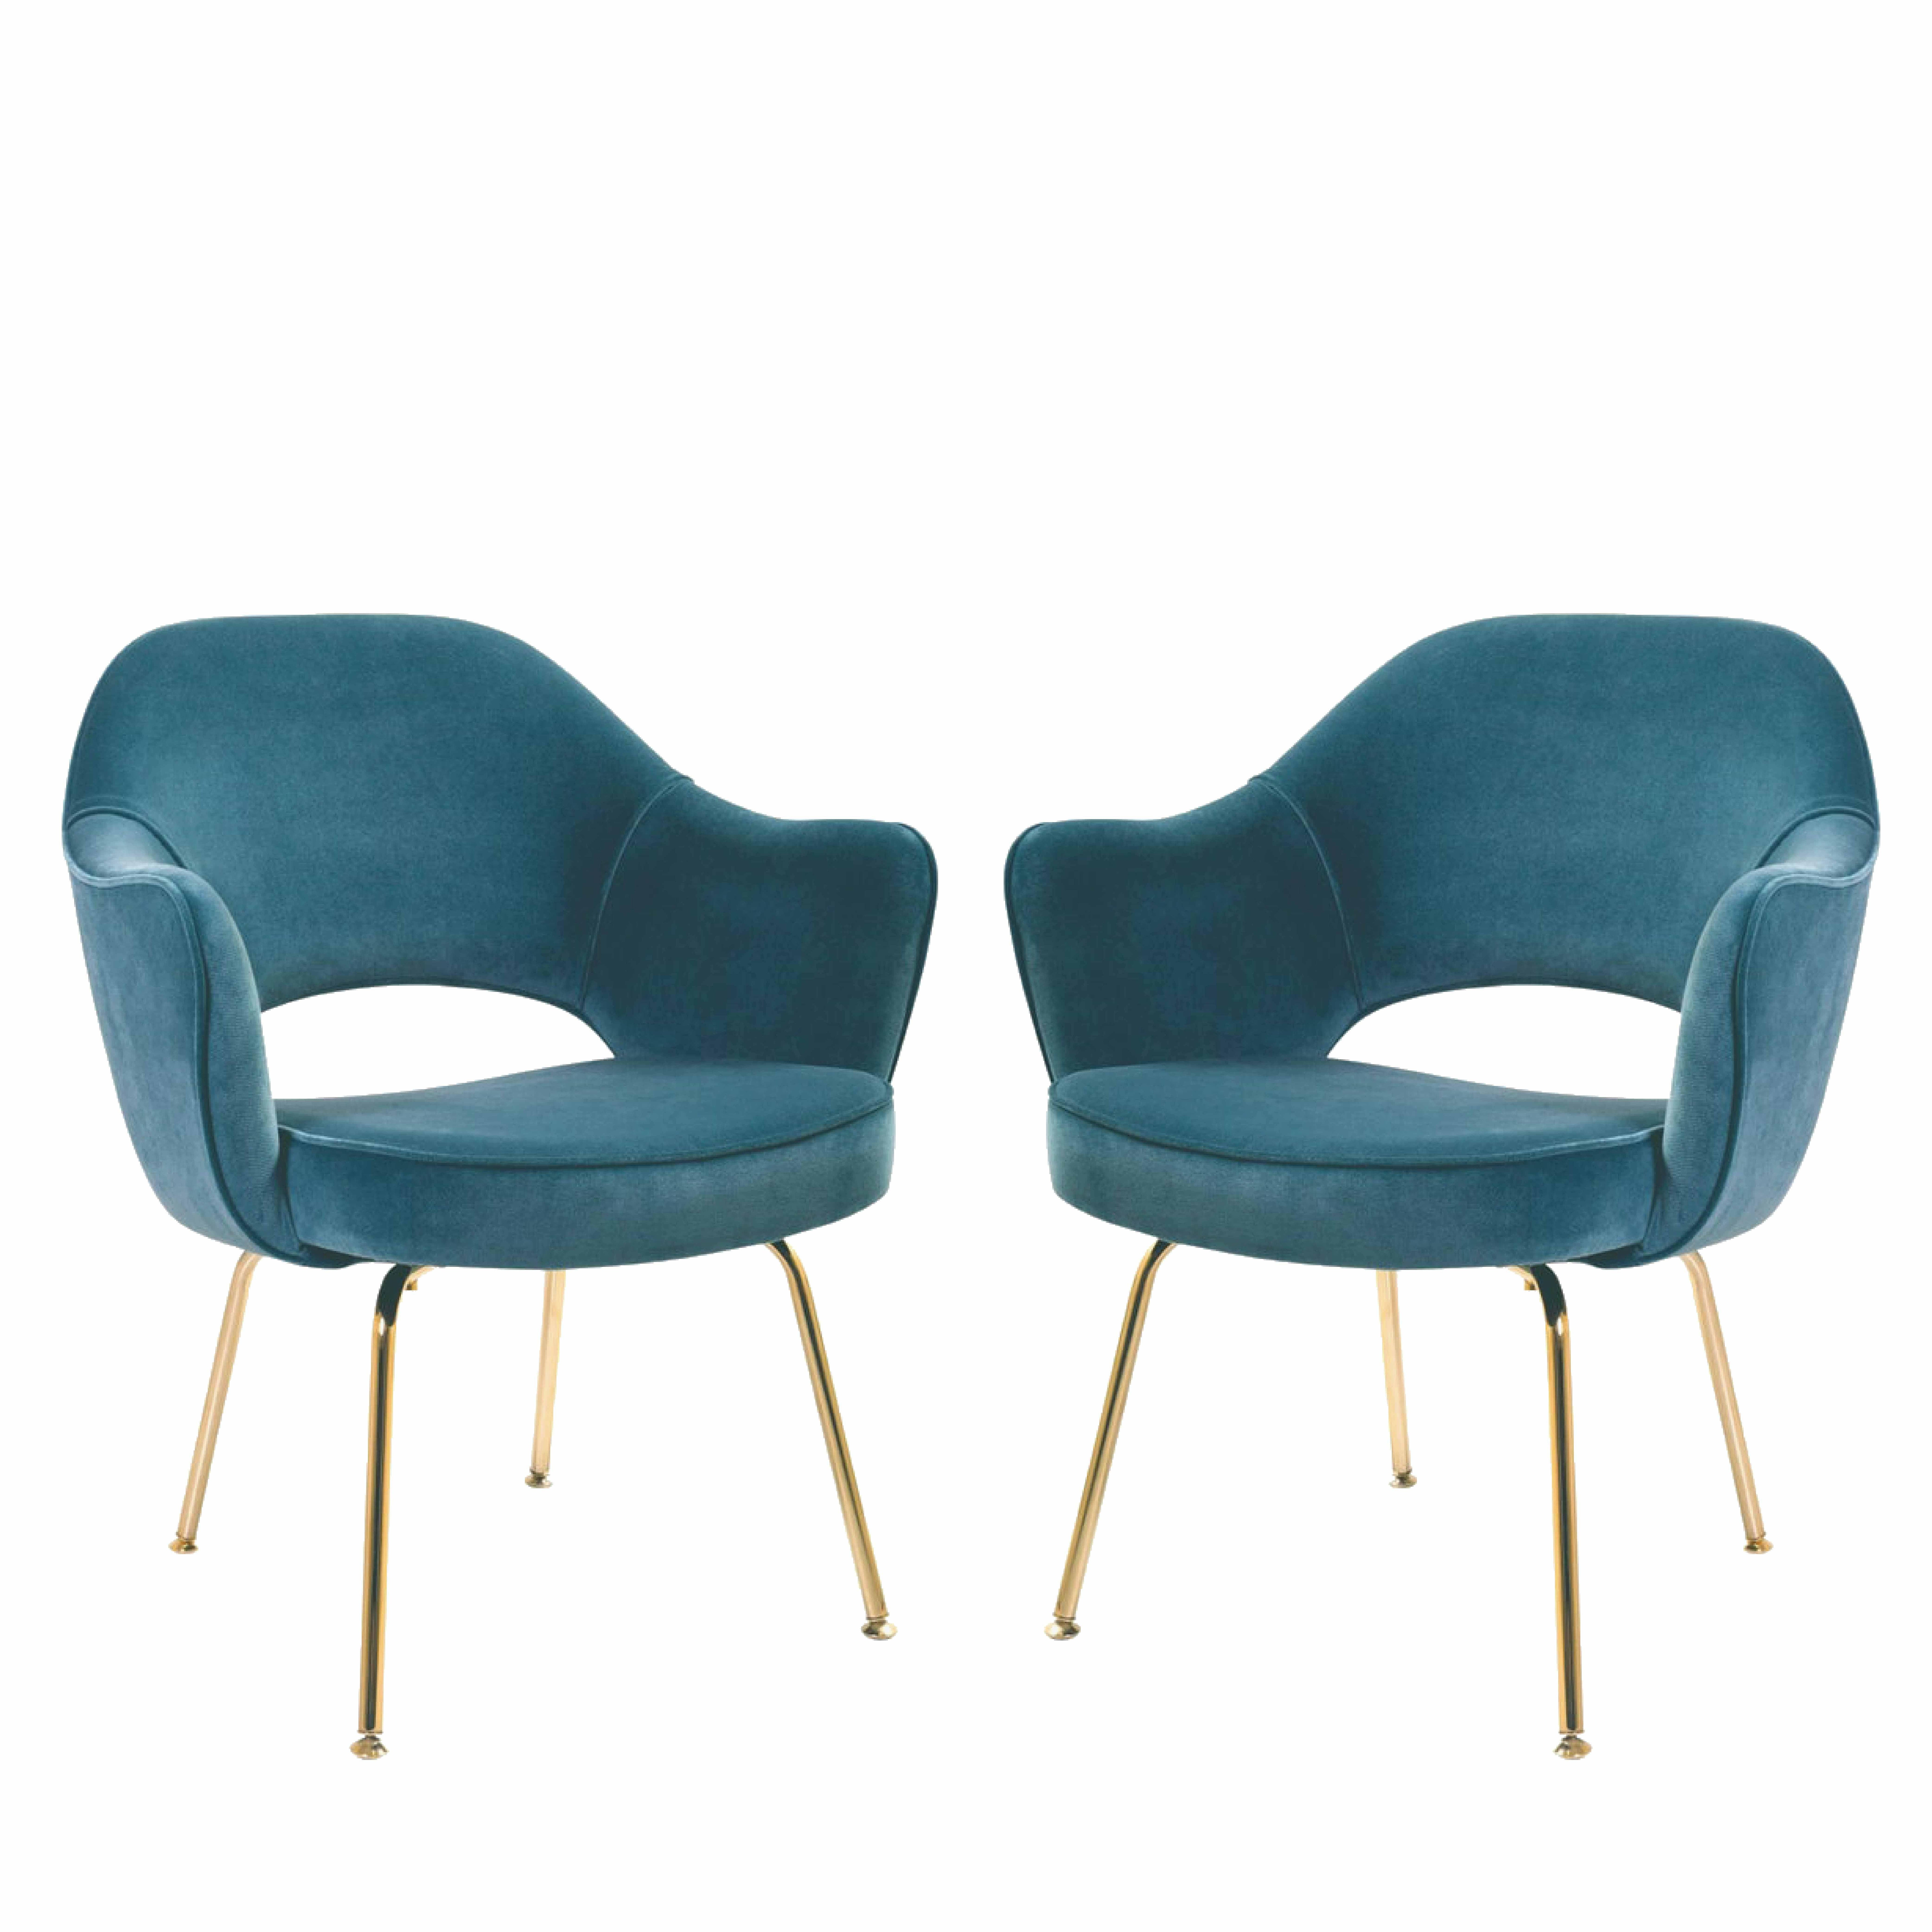 Saarinen Executive Arm Chairs in Pavo Blue Velvet, Gold Edition, Pair For Sale